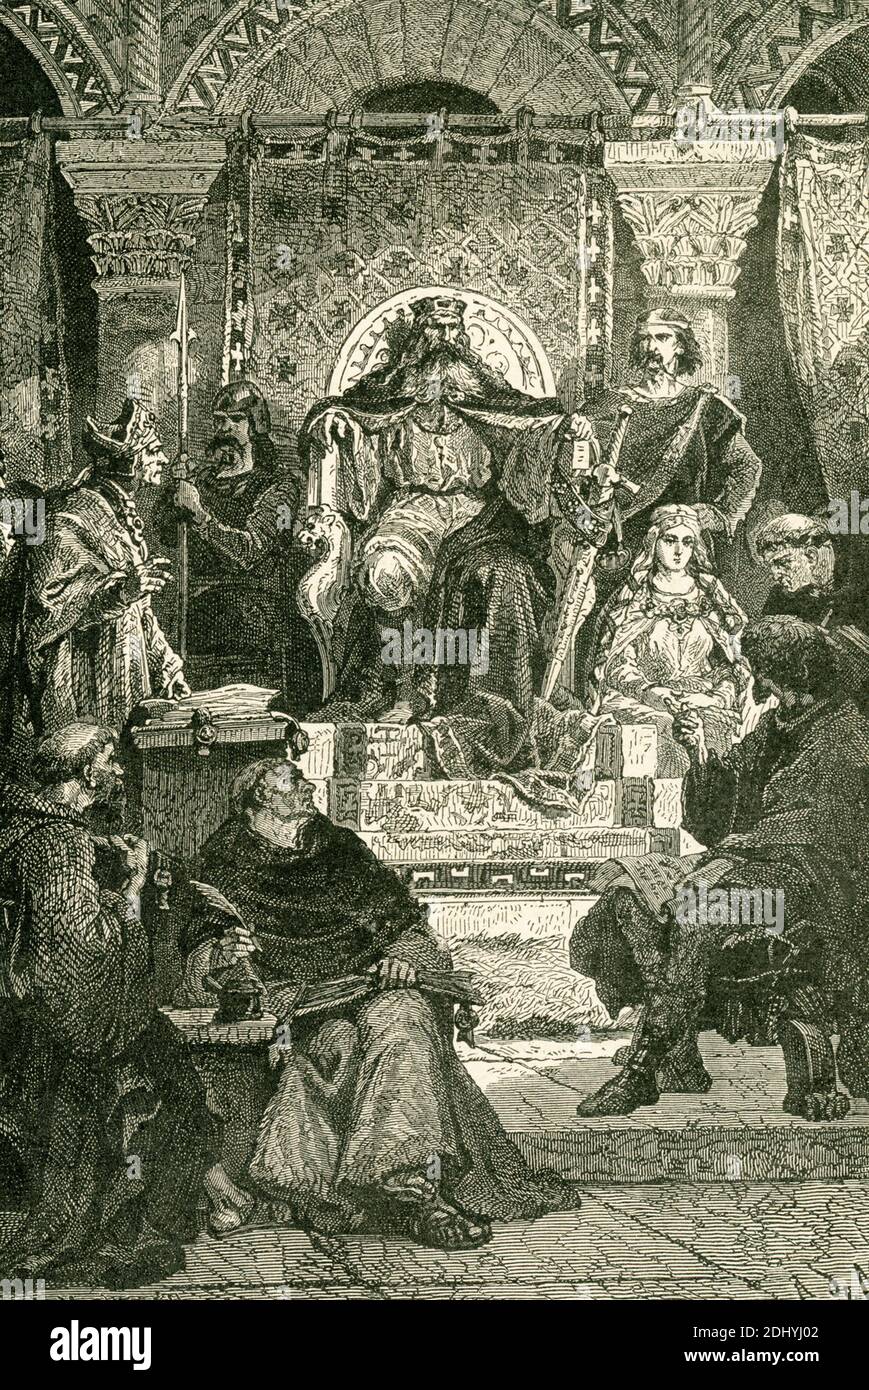 Charlemagne, or Charles the Great, was the emperor of the West  (800–814) and the king of the Franks (768–814). A.D. 800, he restored Leo III to the papal seat and was crowned emperor by Leo on Christmas Day. Here we see him in council. Stock Photo